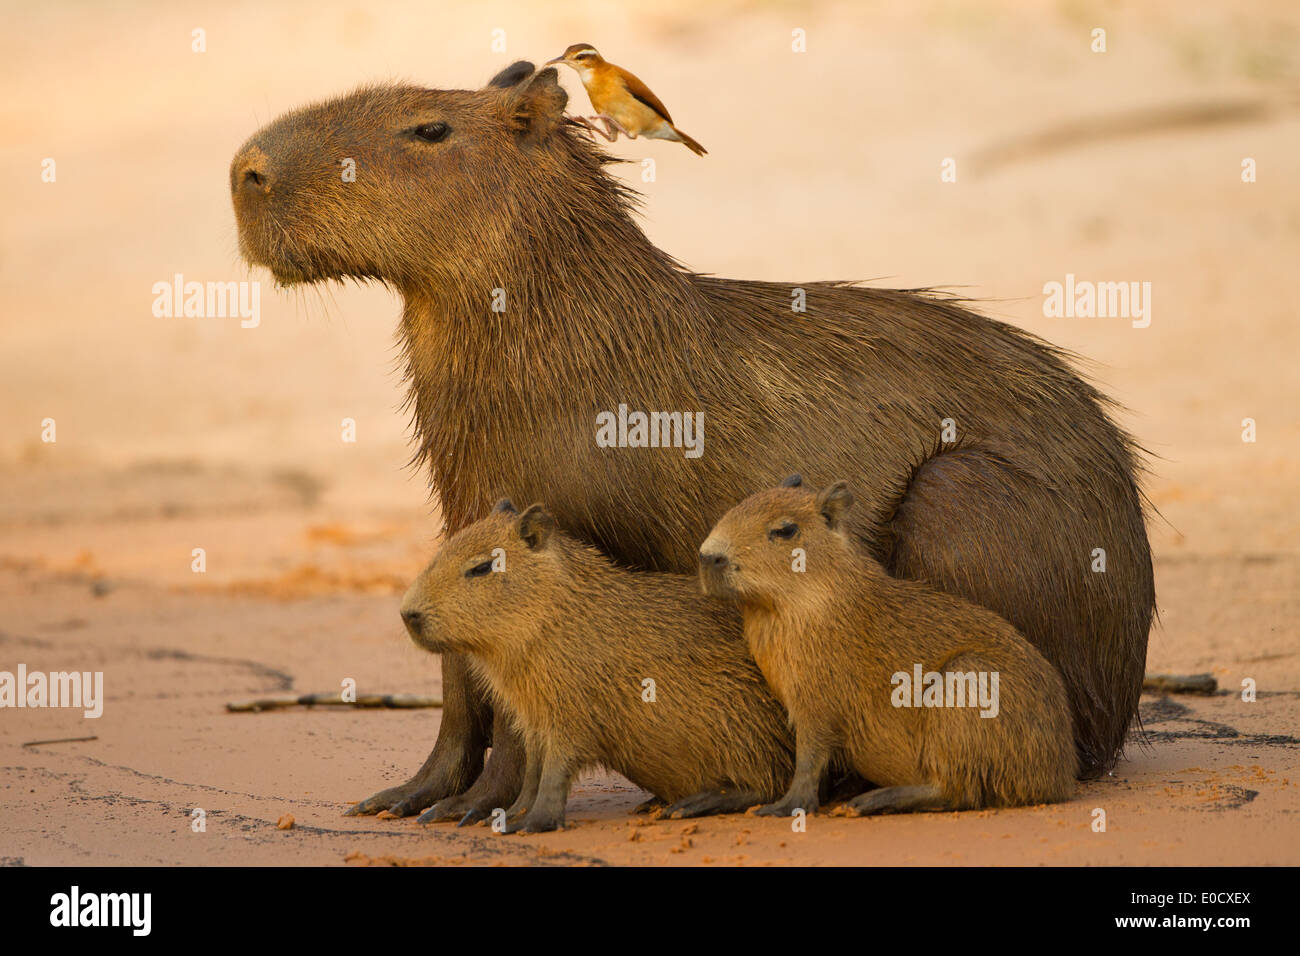 Capybara, the world's largest rodent, adult with young on bank of river, Pantanal, Brazil (Hydrochoerus hydrochaeris) Stock Photo